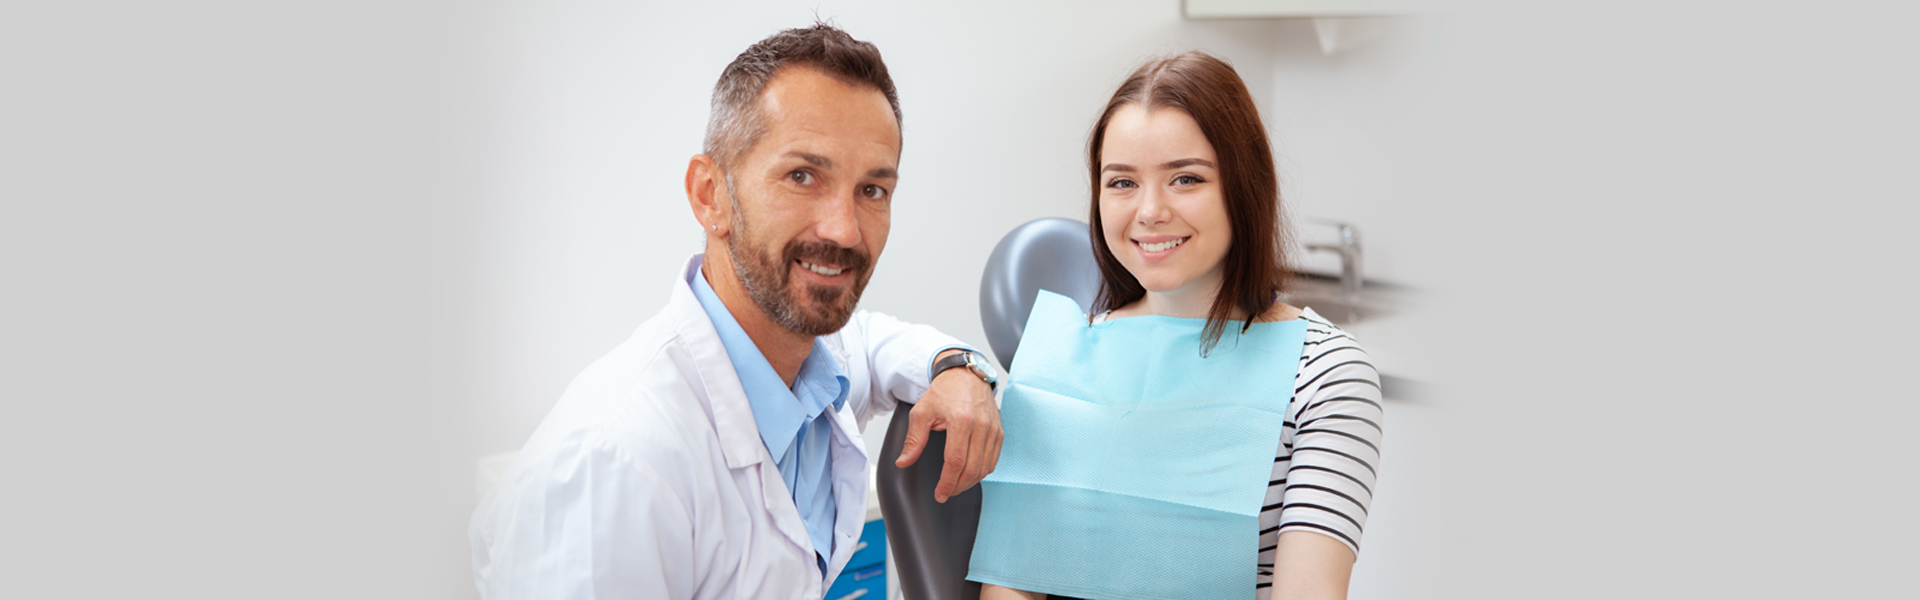 What Are The Benefits of Teeth Whitening From A Professional Dentist?